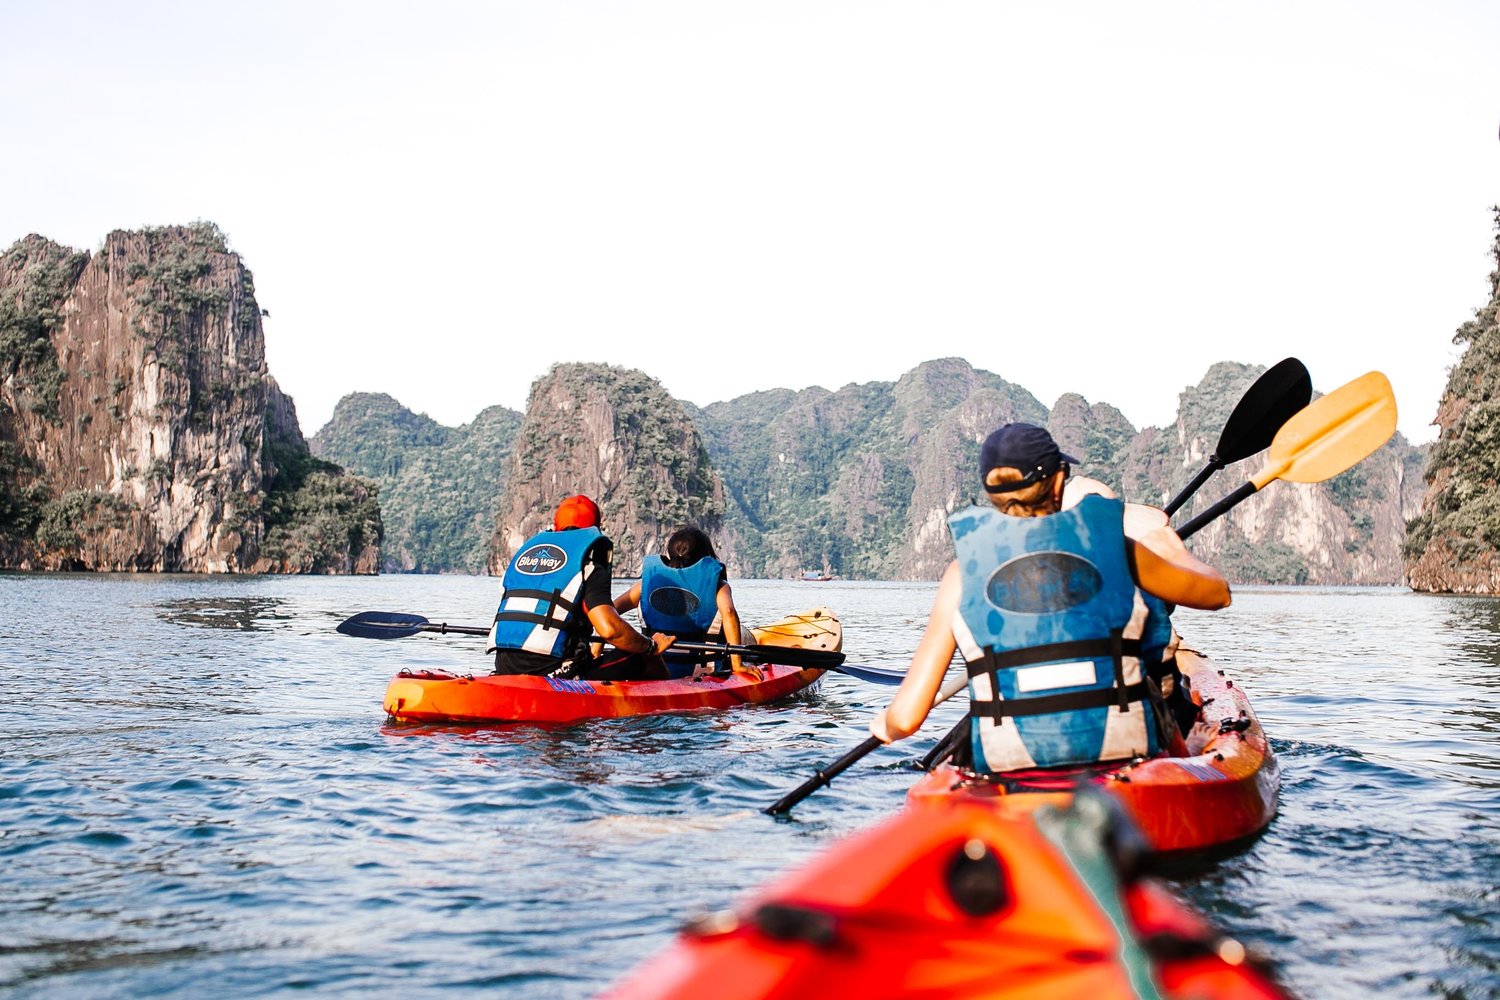 Kayaking can be a great adventure for couples - if a sometimes humorous adventure...